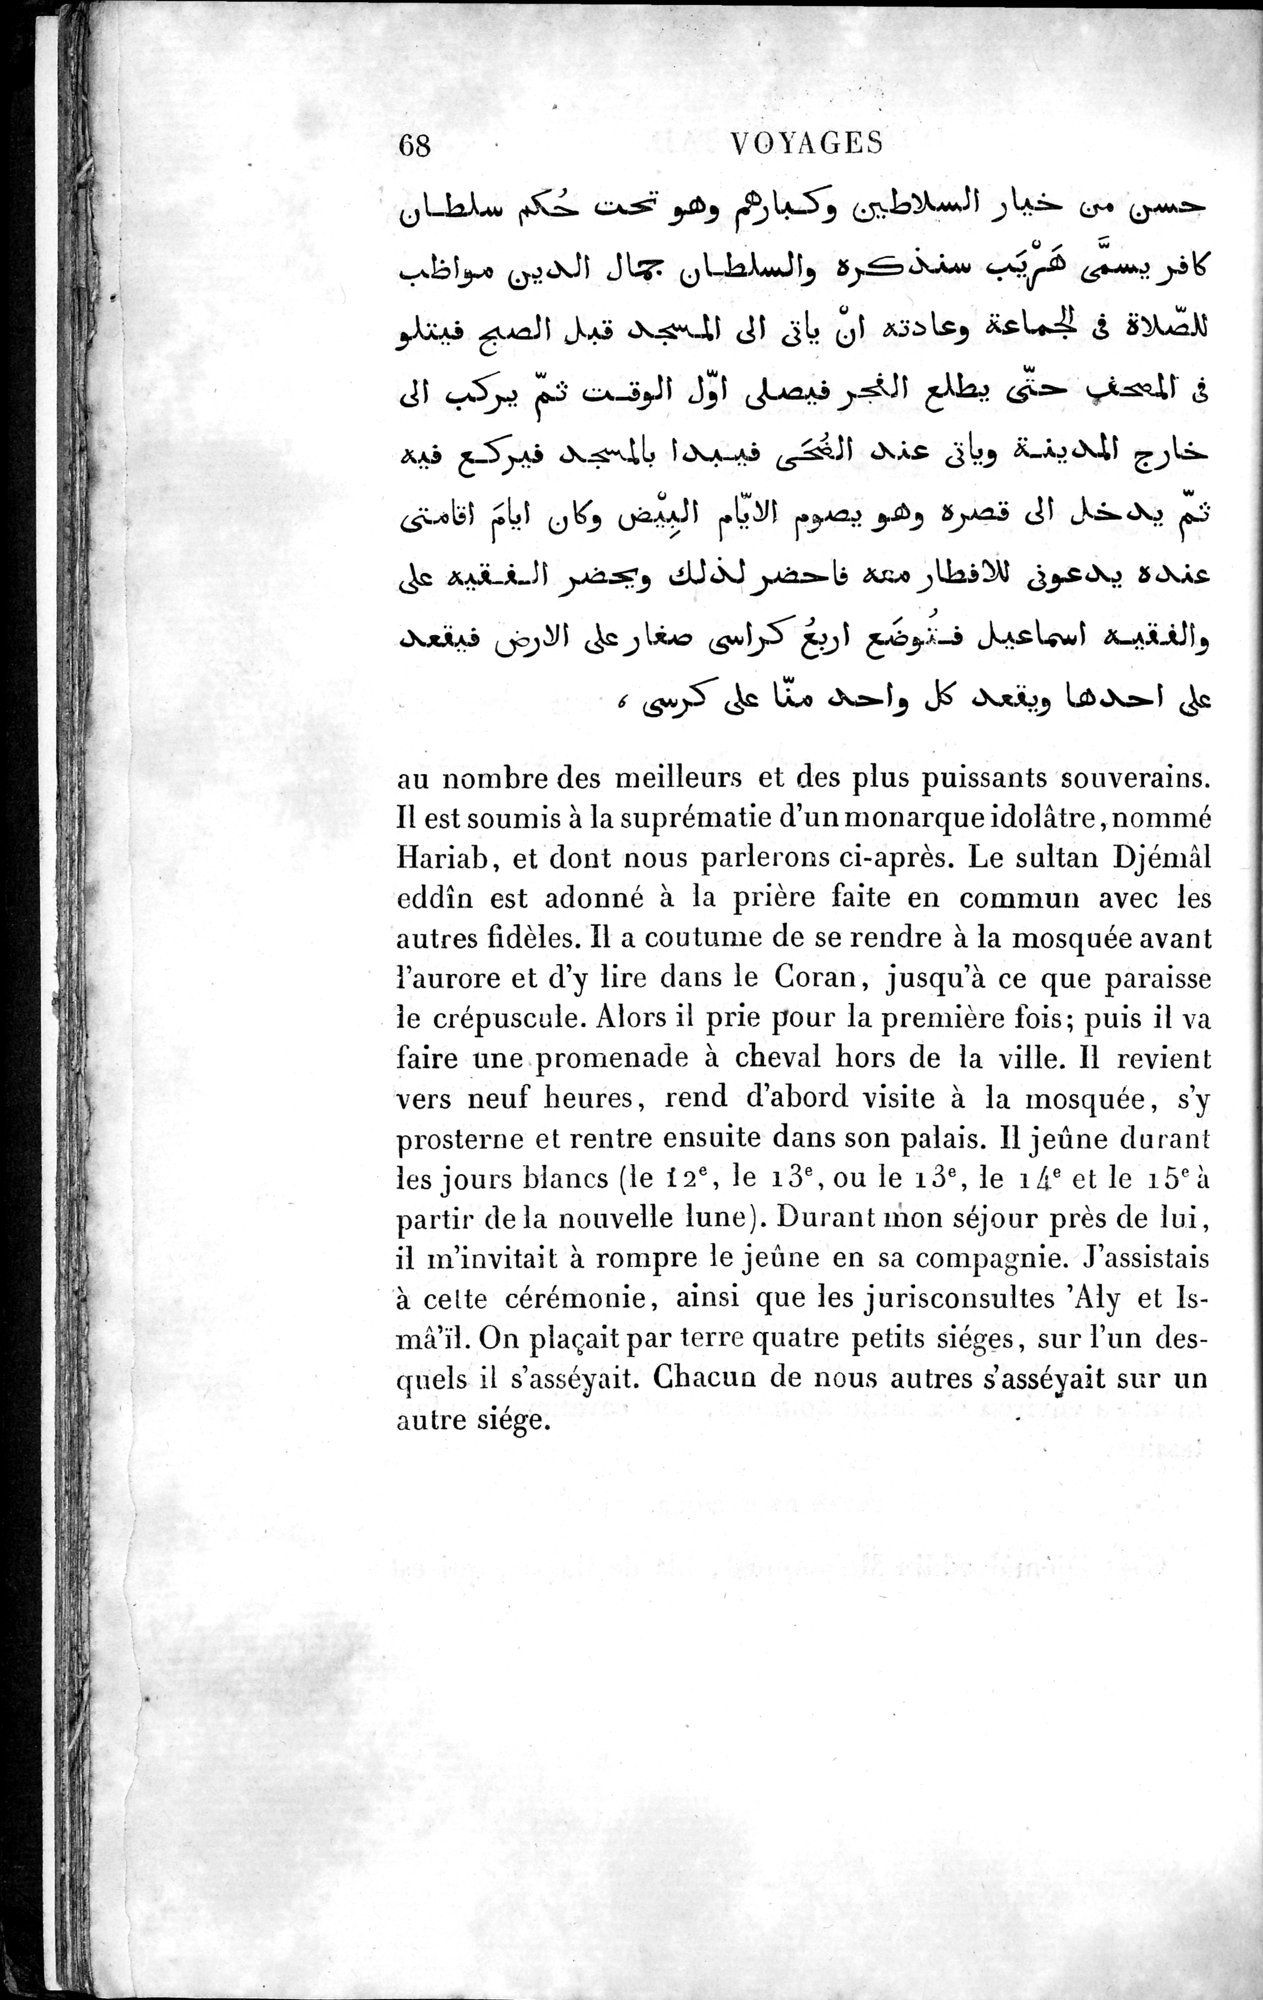 Voyages d'Ibn Batoutah : vol.4 / Page 80 (Grayscale High Resolution Image)